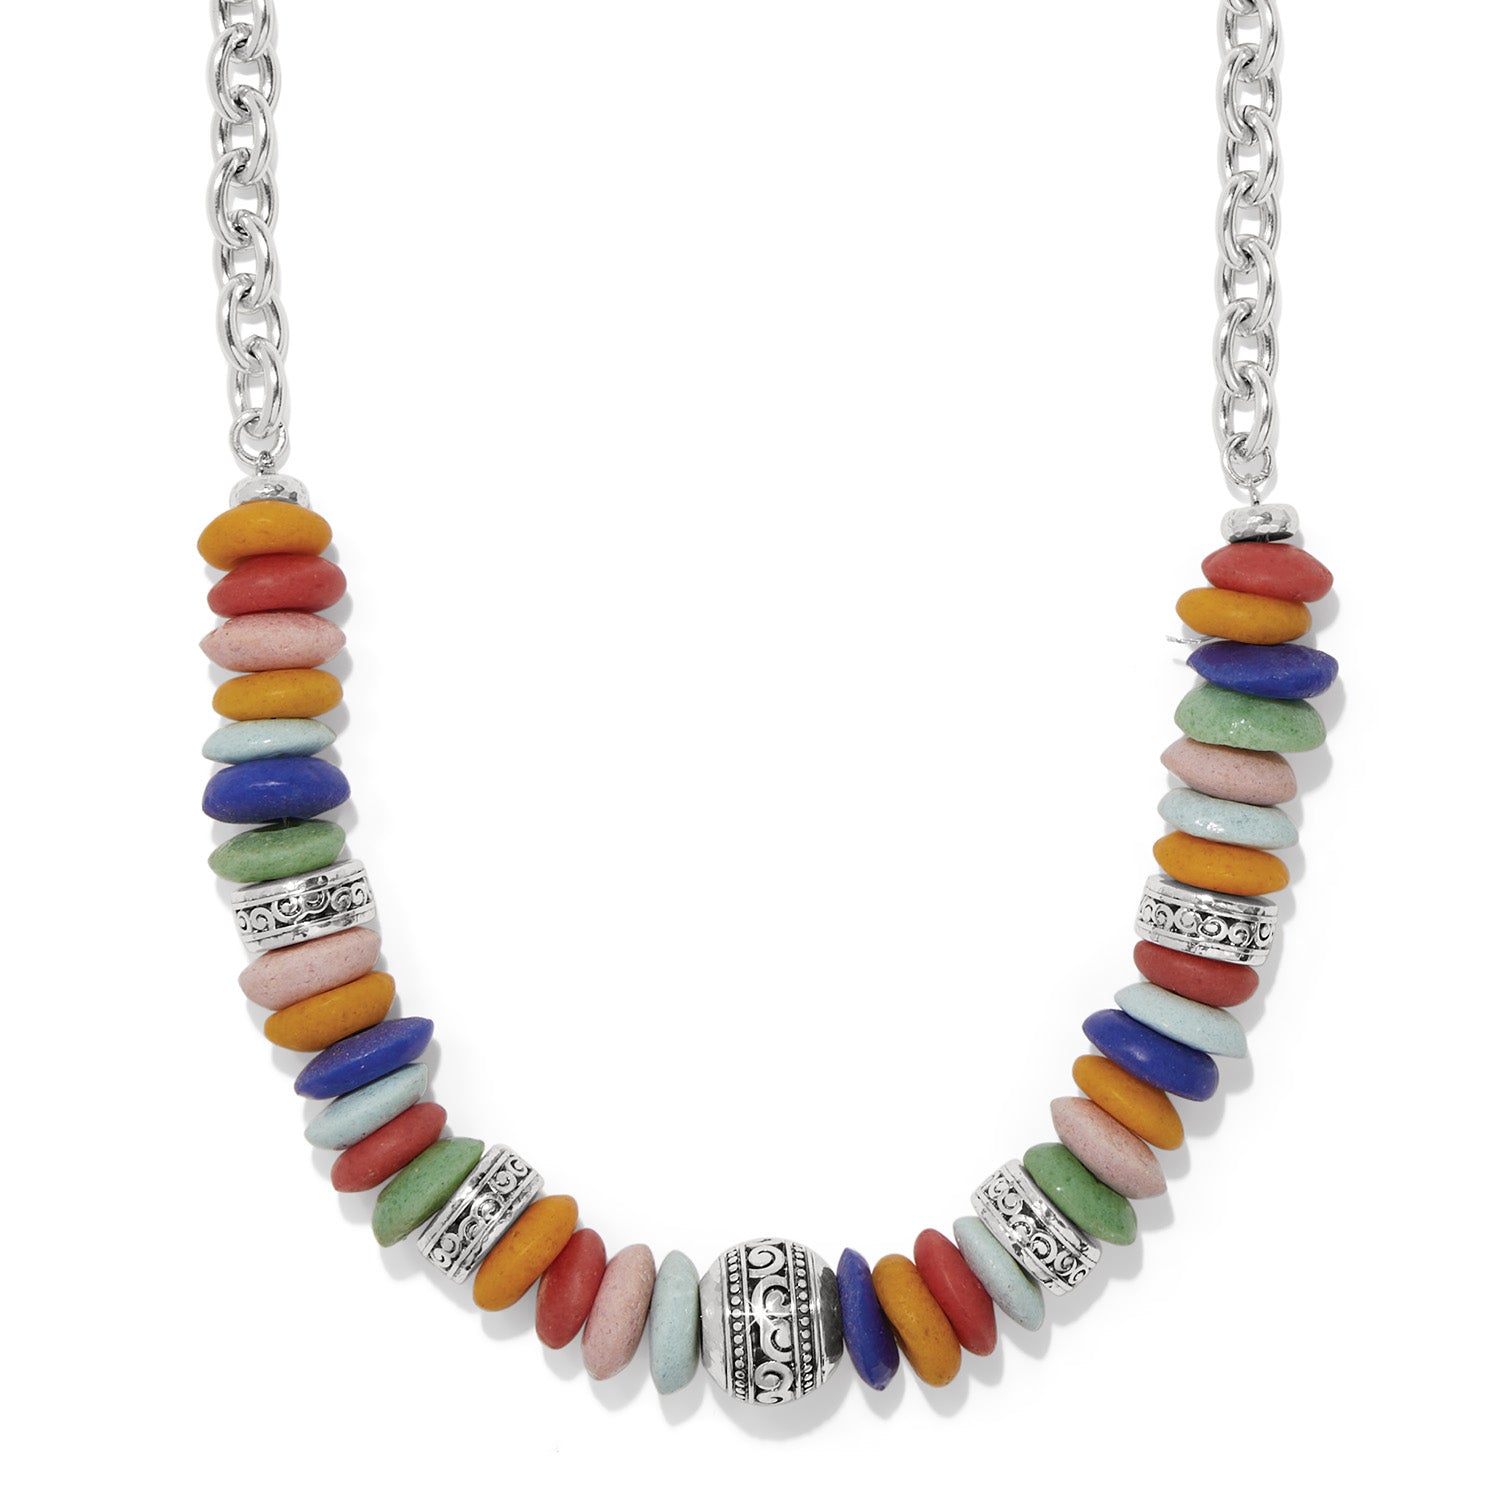 Mingle Medley Beaded Sphere Necklace